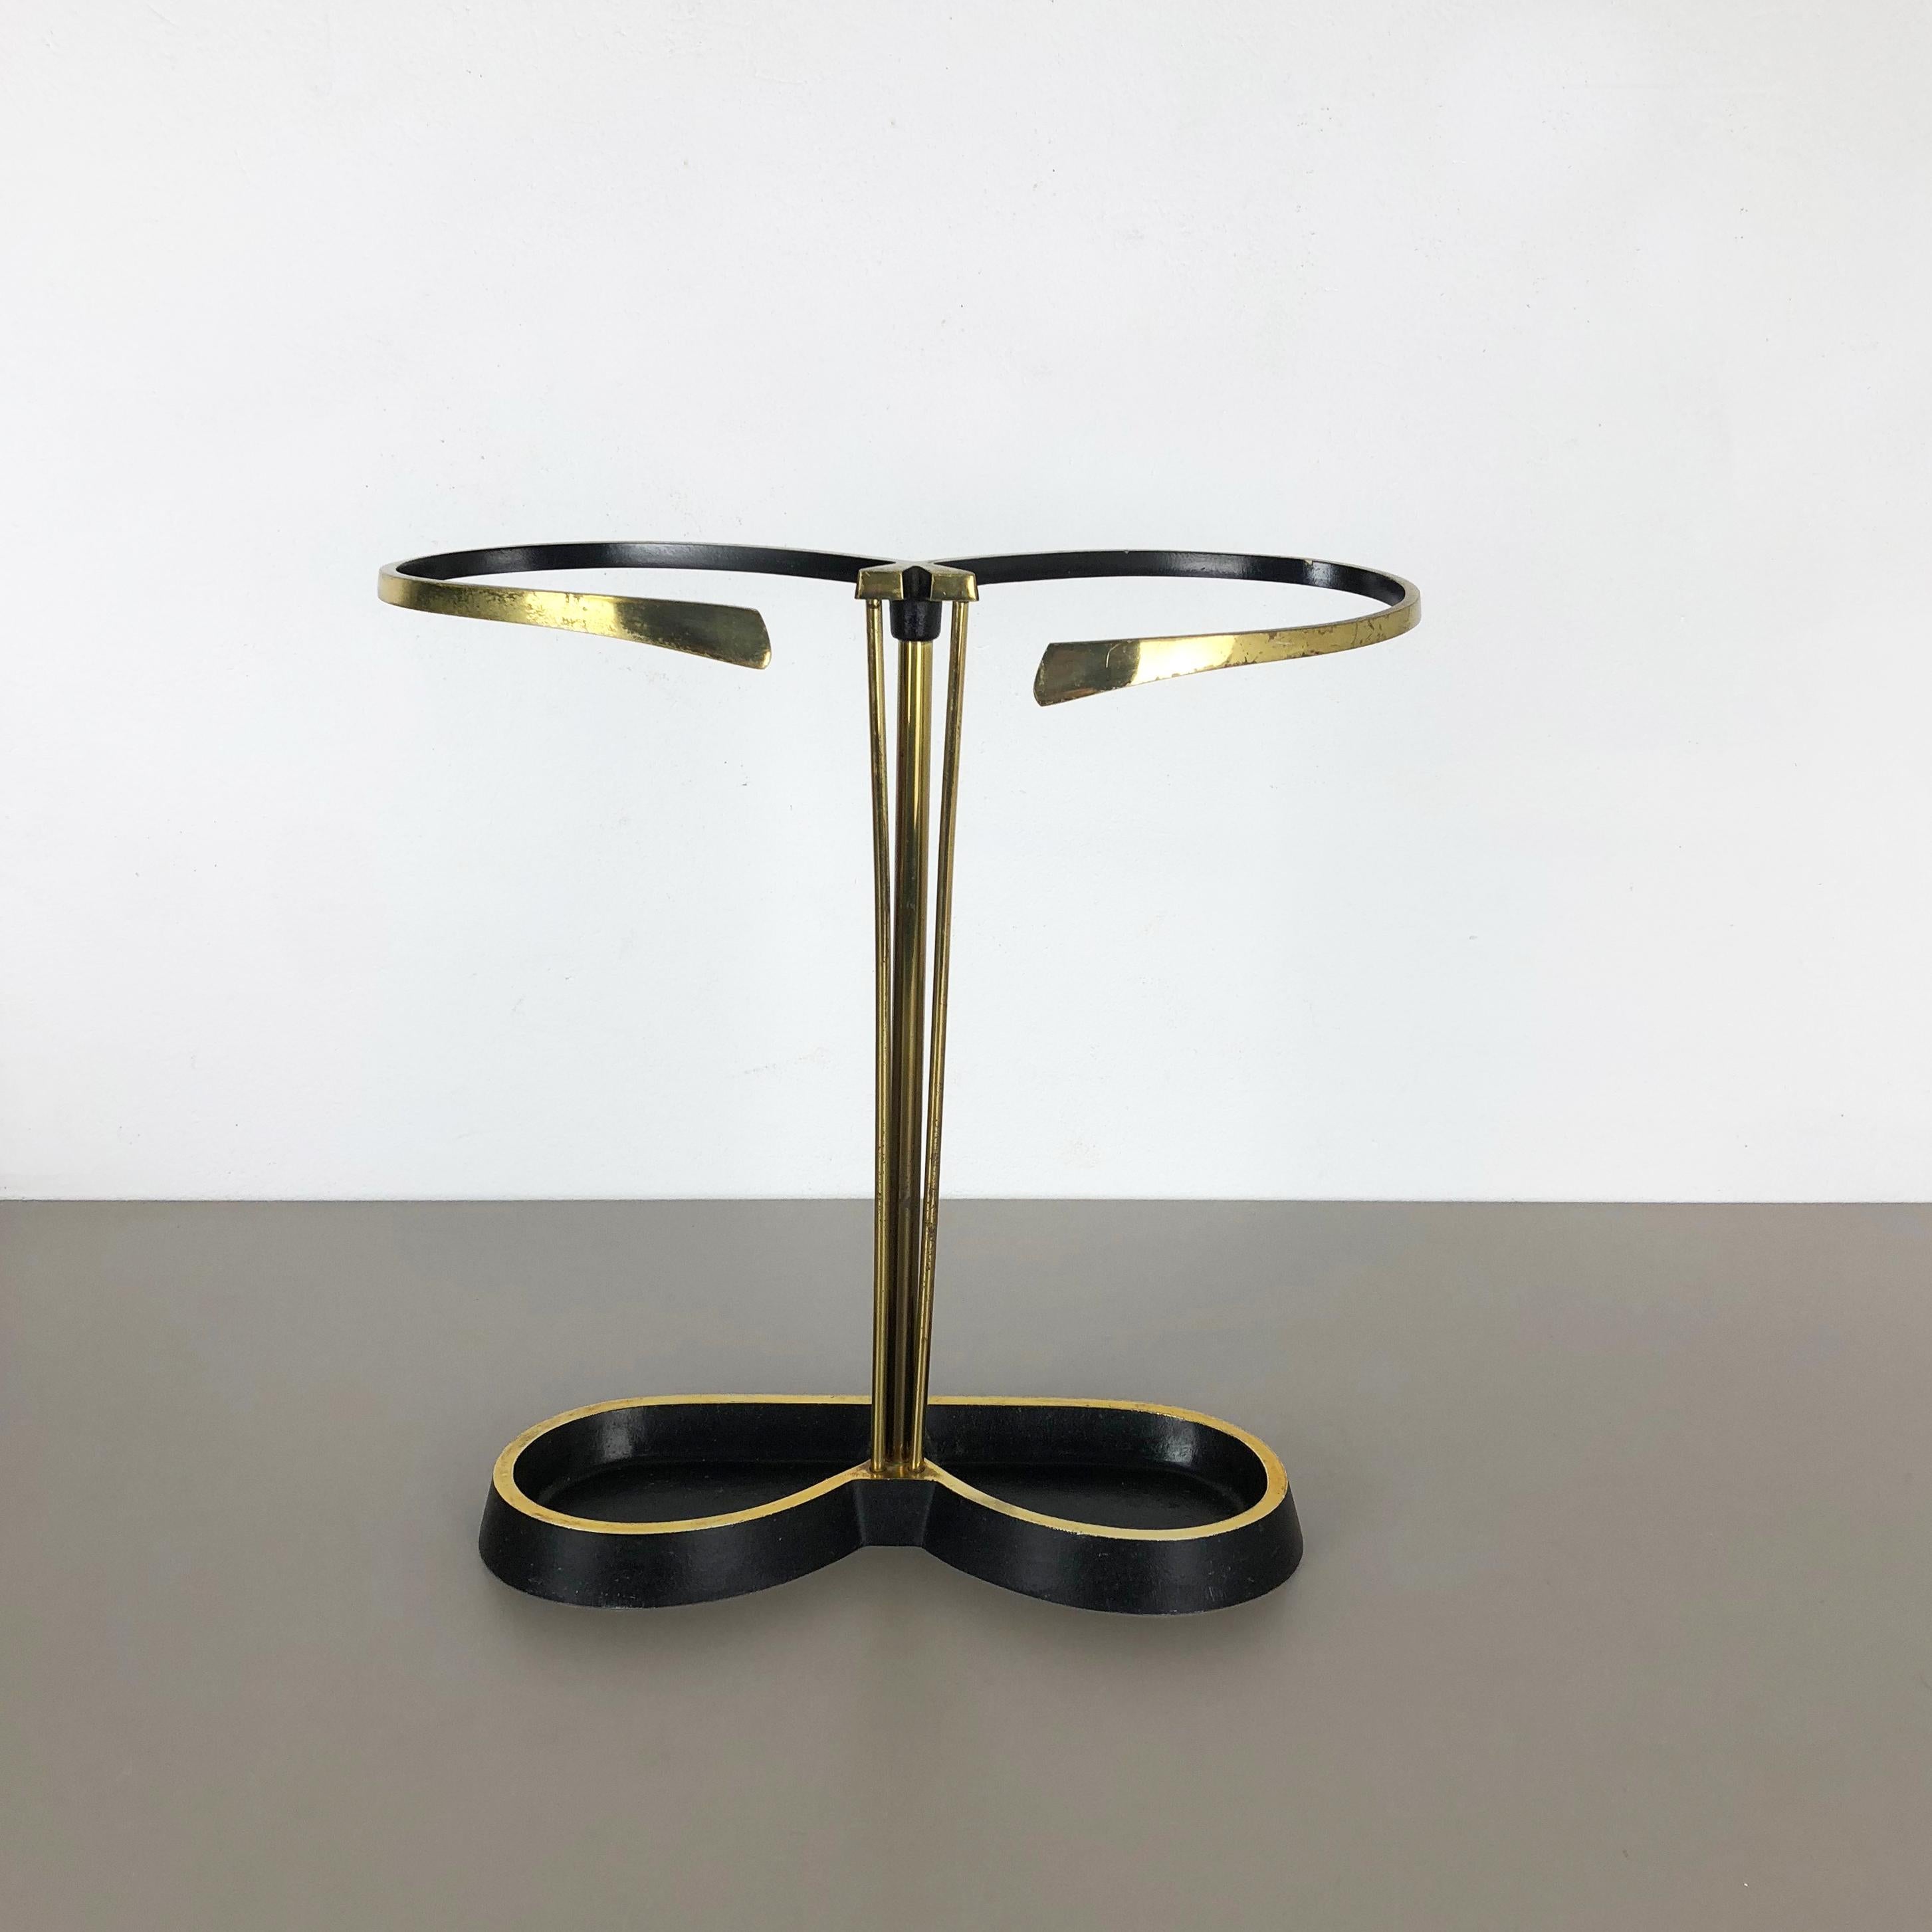 Article:

Bauhaus umbrella stand


Origin:

Germany


Age:

1950s


This original vintage Bauhaus style umbrella stand was produced in the 1950s in Germany. it is made of solid metal with brass applications at the top and upright